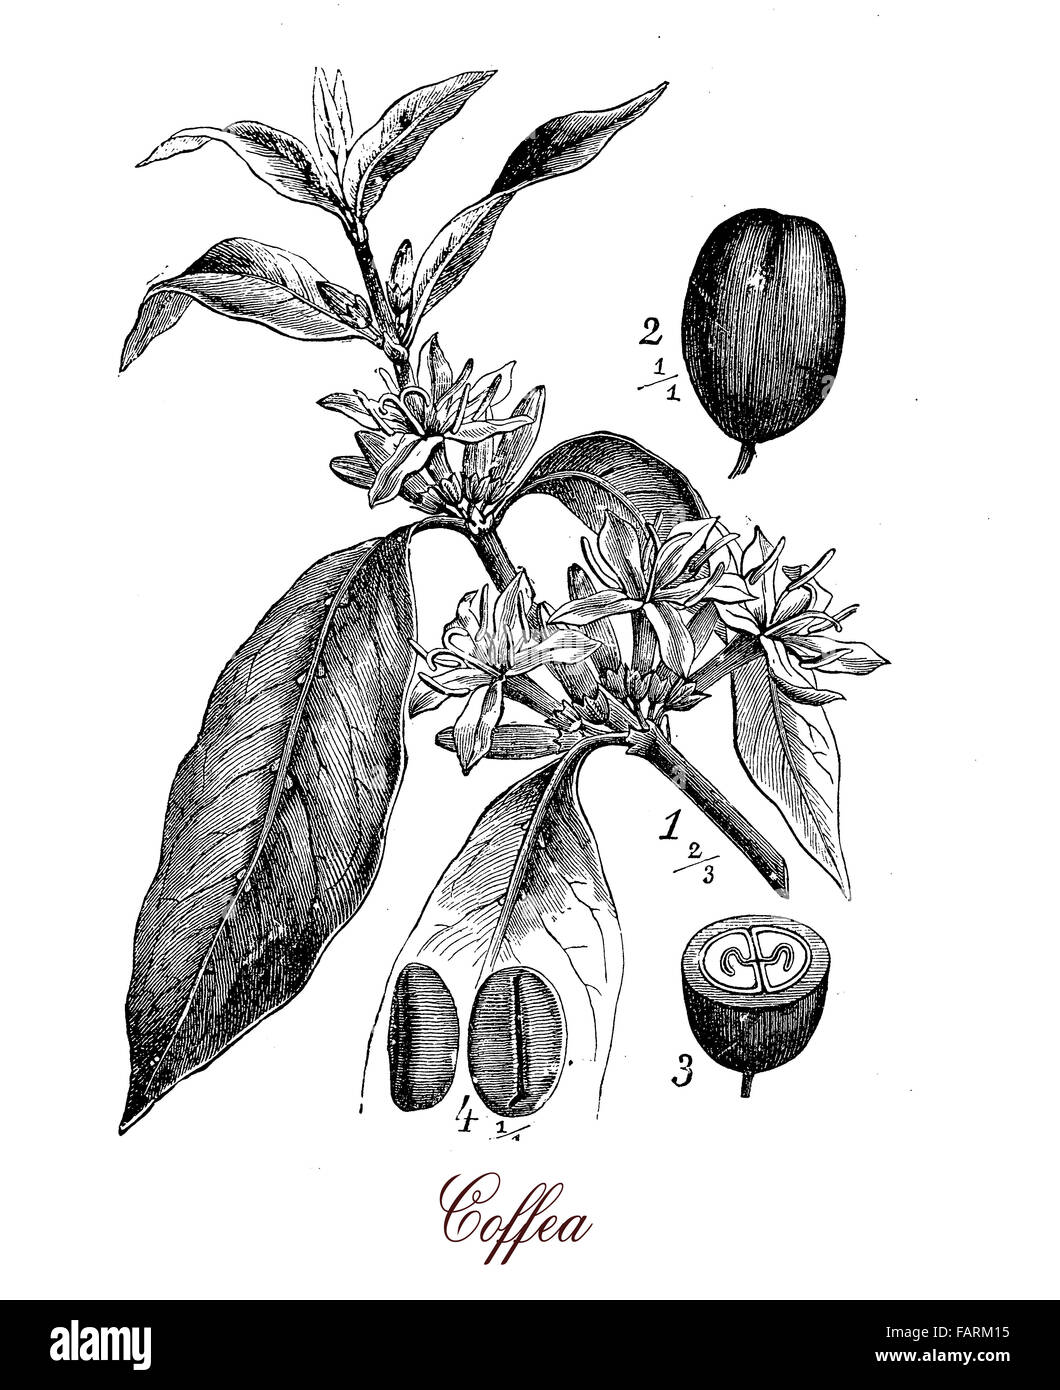 Vintage print describing Coffea (coffee plant)  botanical morphology:  leaves, flowers and berries containing 2 coffee beans each. Stock Photo